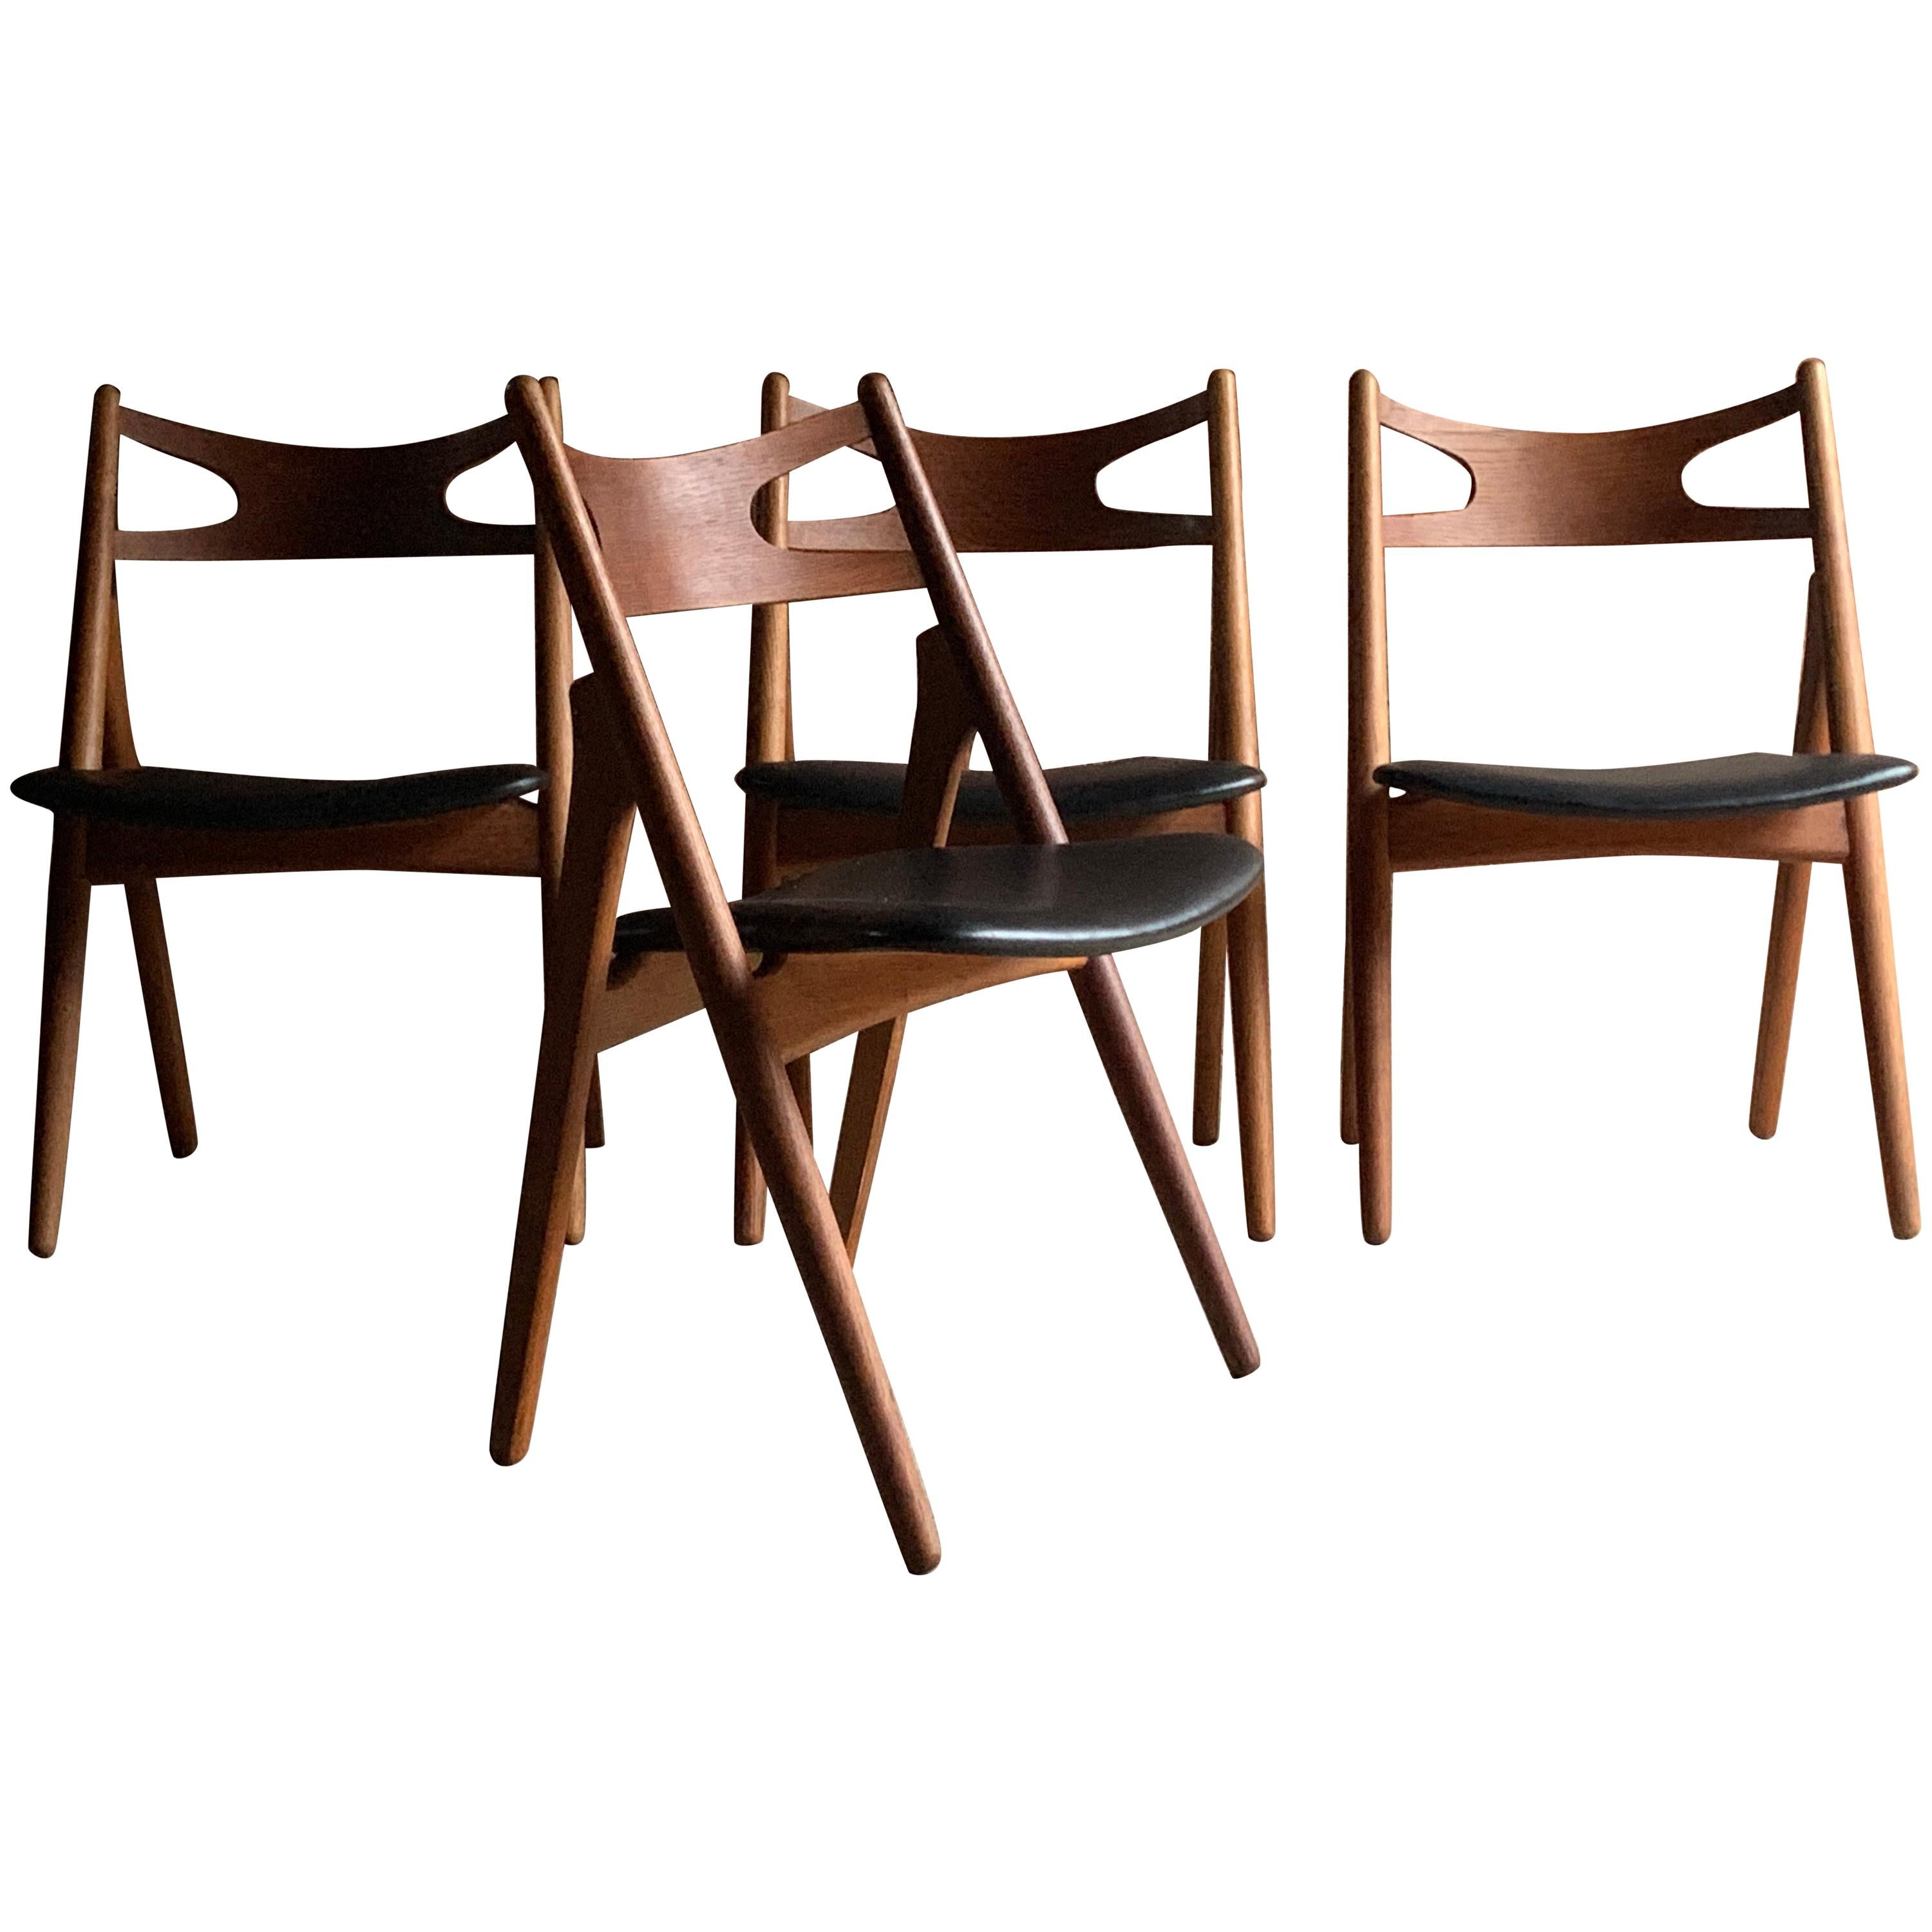 Midcentury Danish Hans J Wegner design CH-29 Sawbuck chairs by Carl Hansen & Son circa 1950s, the chairs have been full restored and are finished in teak.


Condition report: The chairs have been completely restored and re-polished and offered in